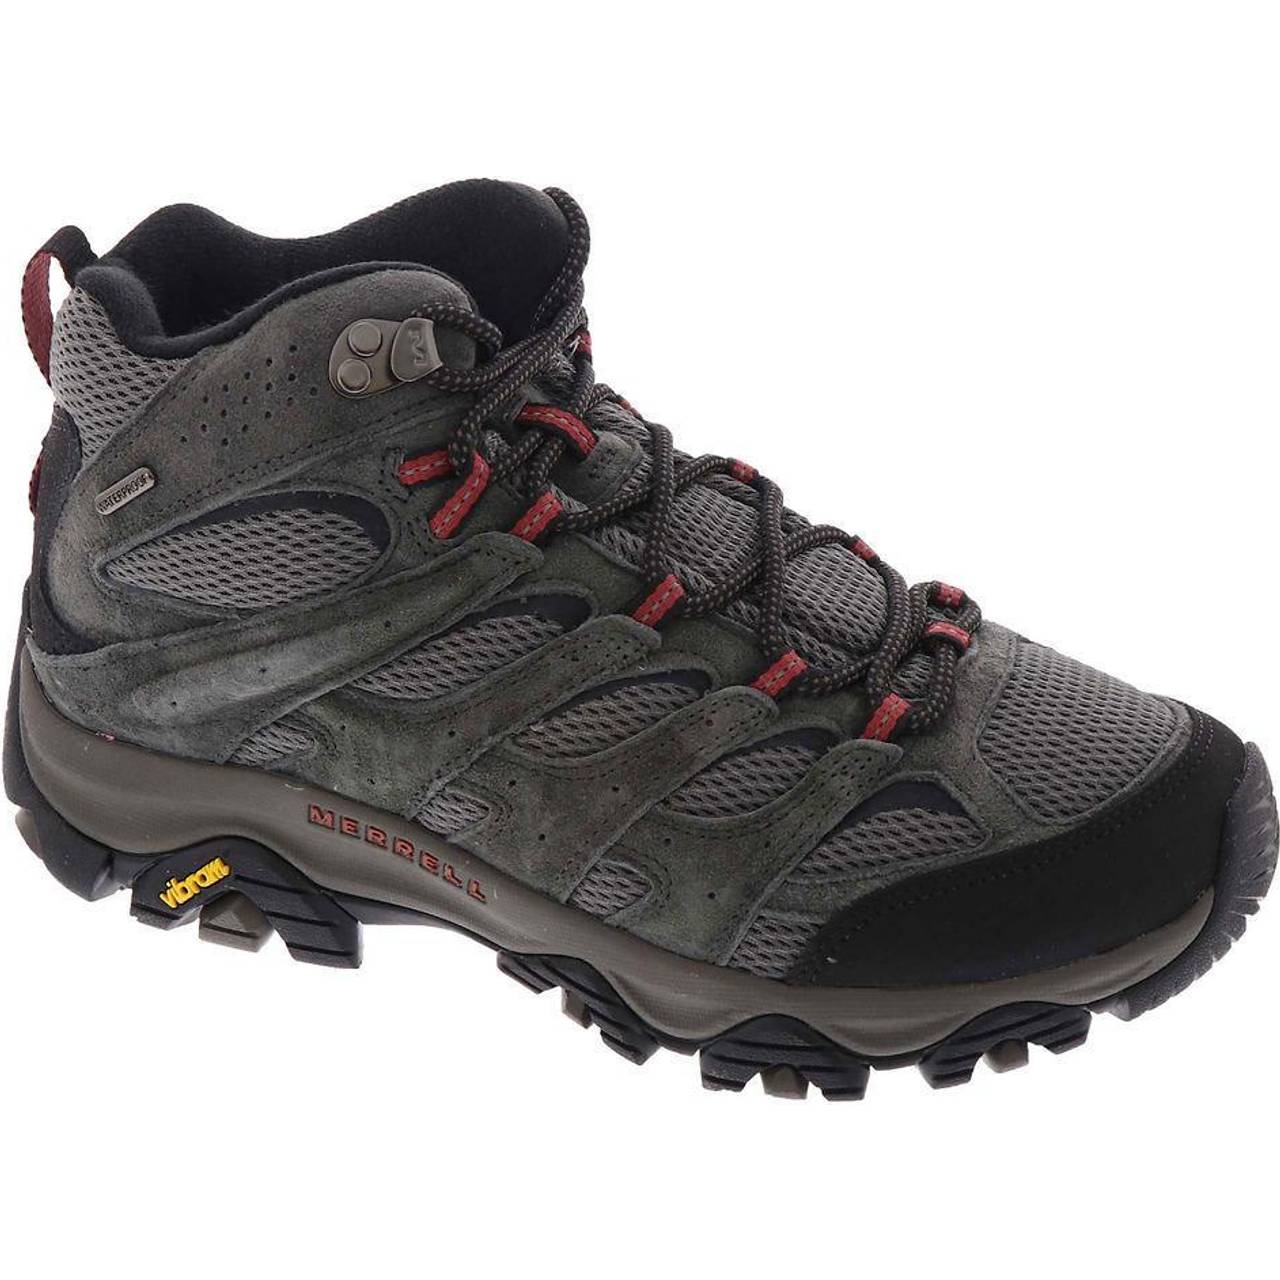 Merrell Moab Mid Waterproof • See lowest price (0 stores)